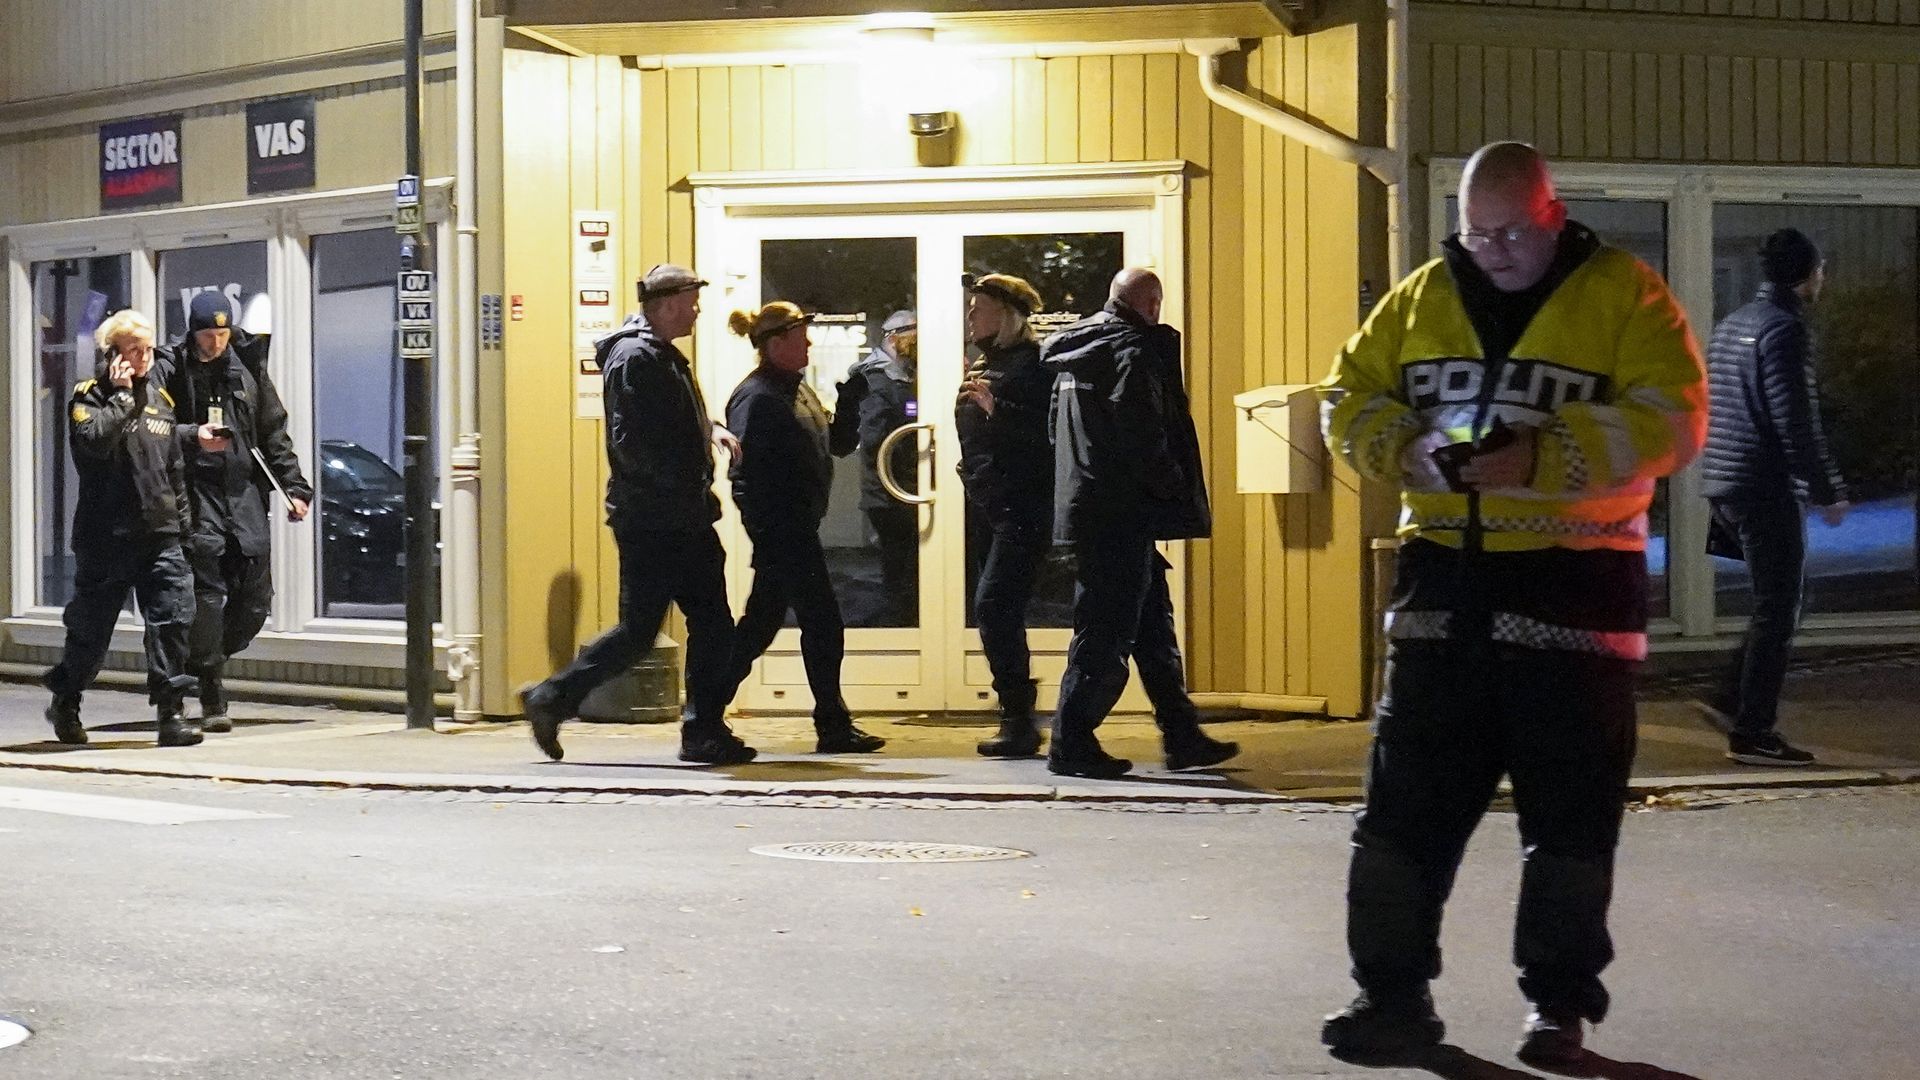 Police on a scene in Norway